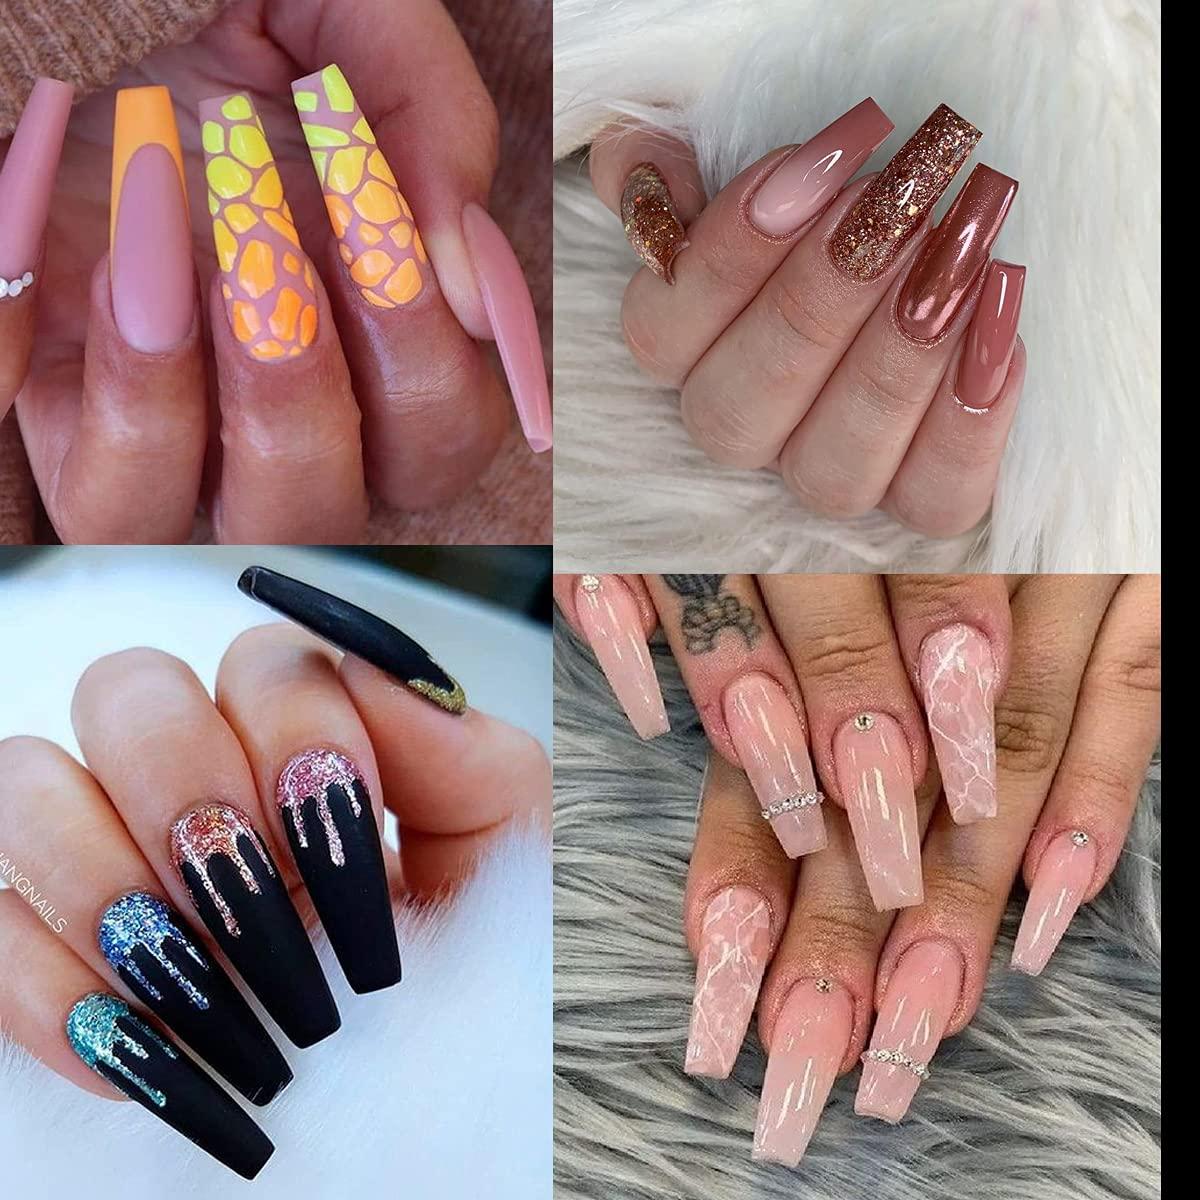 10 Square Nail Ideas and Designs for 2022 - Best Square Manicures